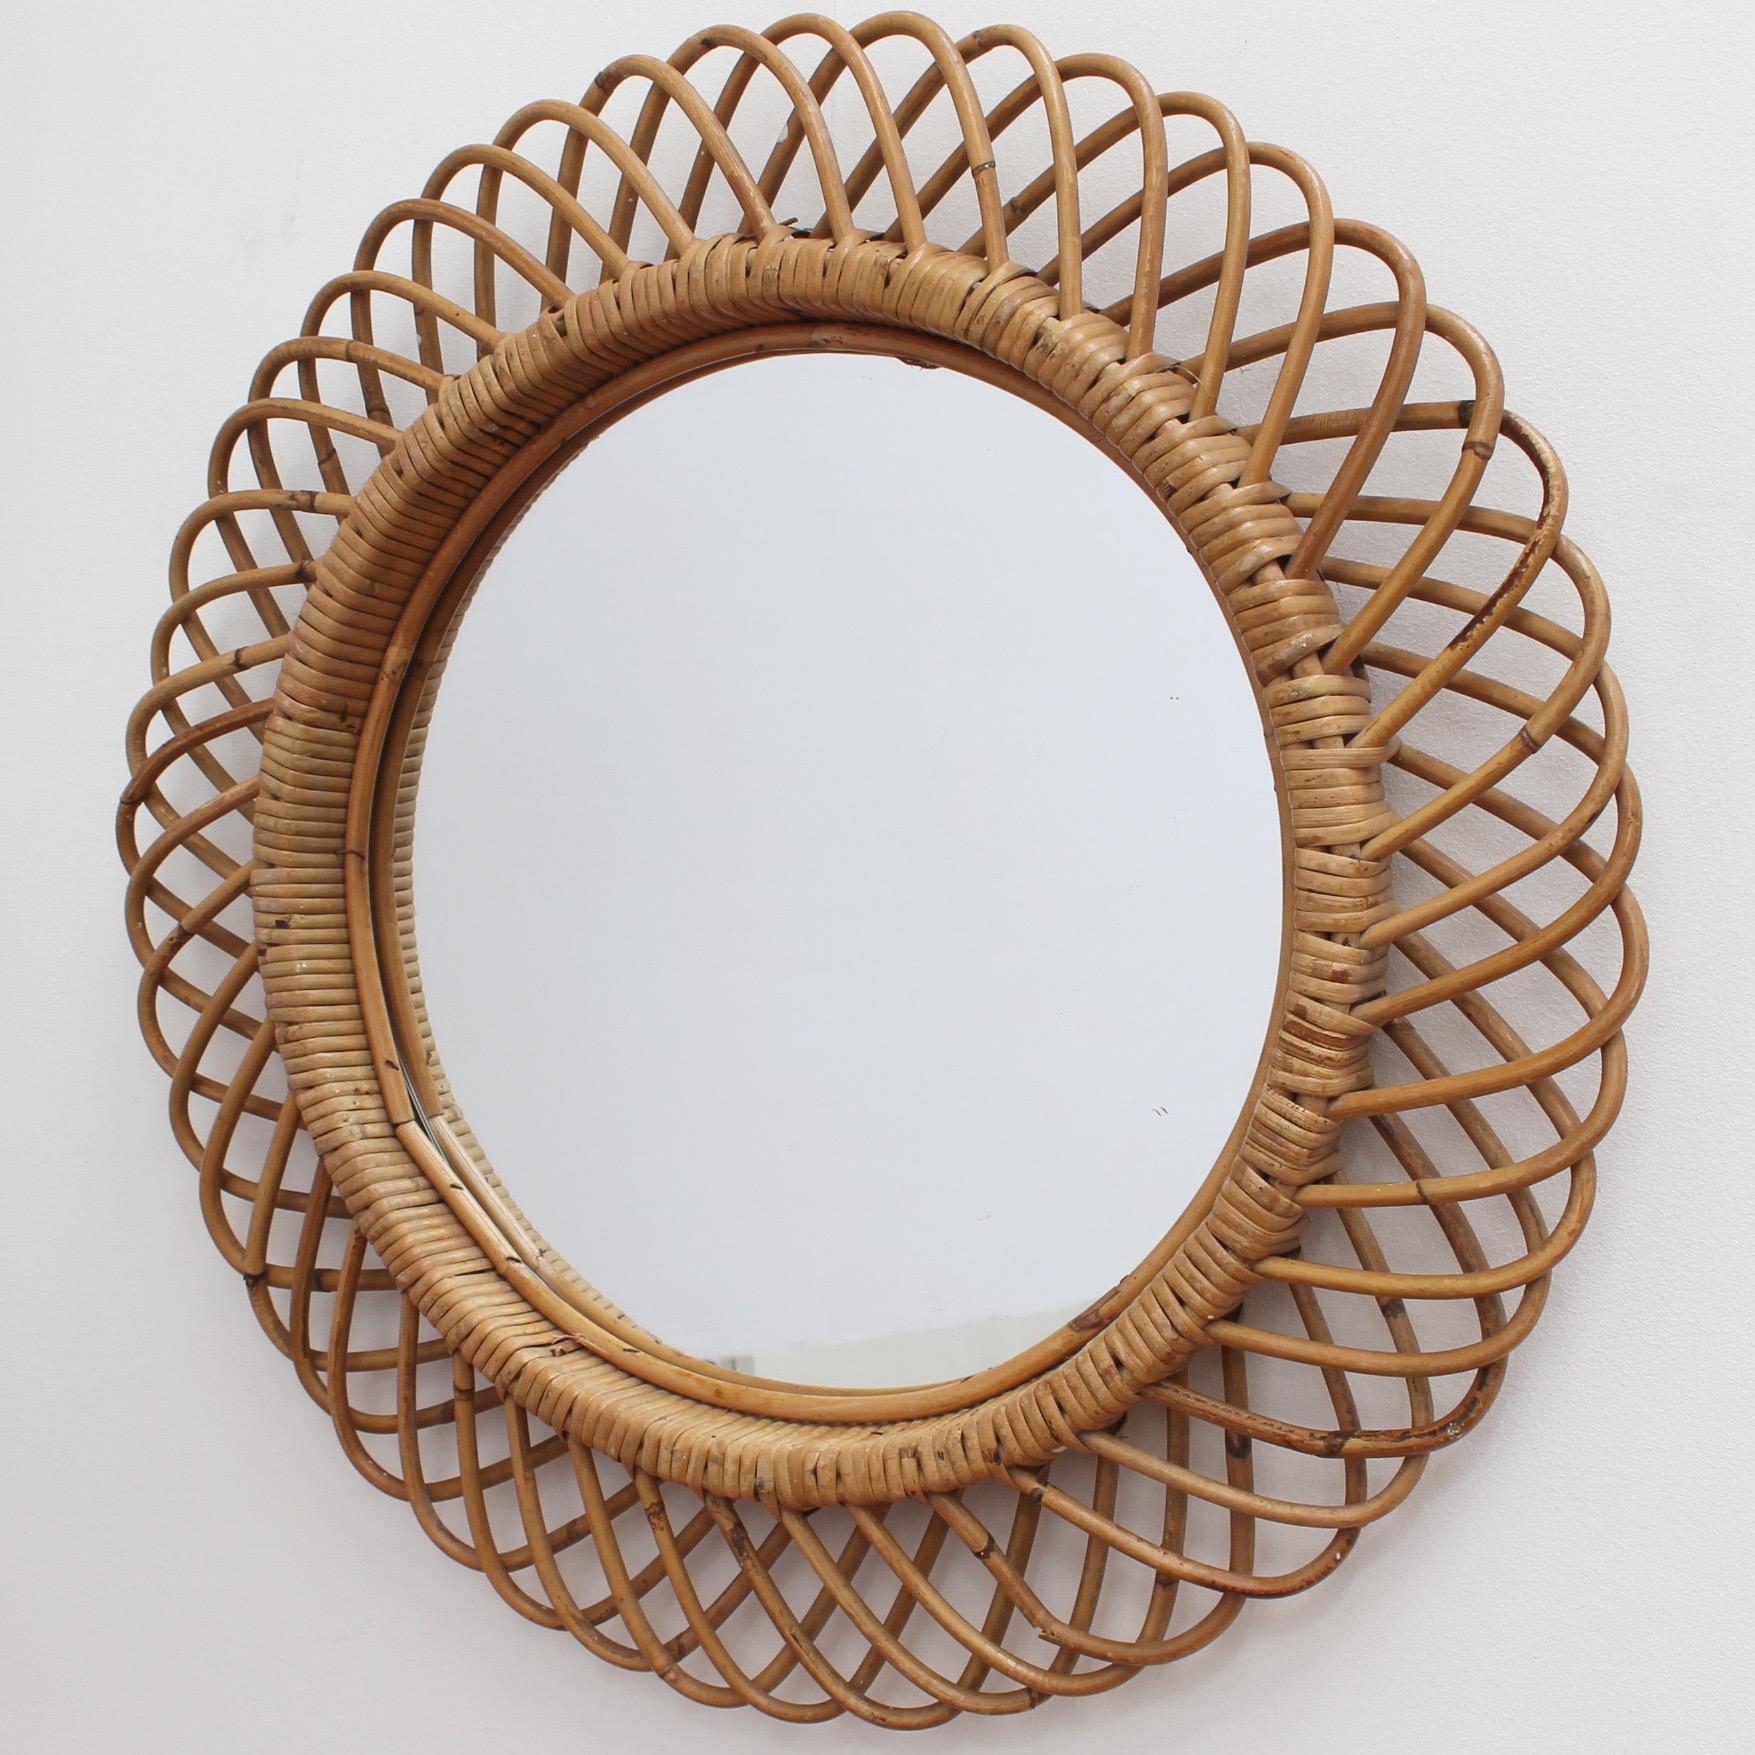 Italian rattan round wall mirror (circa 1960s) in the style of Franco Albini. This is a mirror with substantial depth and a complex weave of rattan. There is a beautiful patina on the rattan and it is in good vintage condition. The original mirror